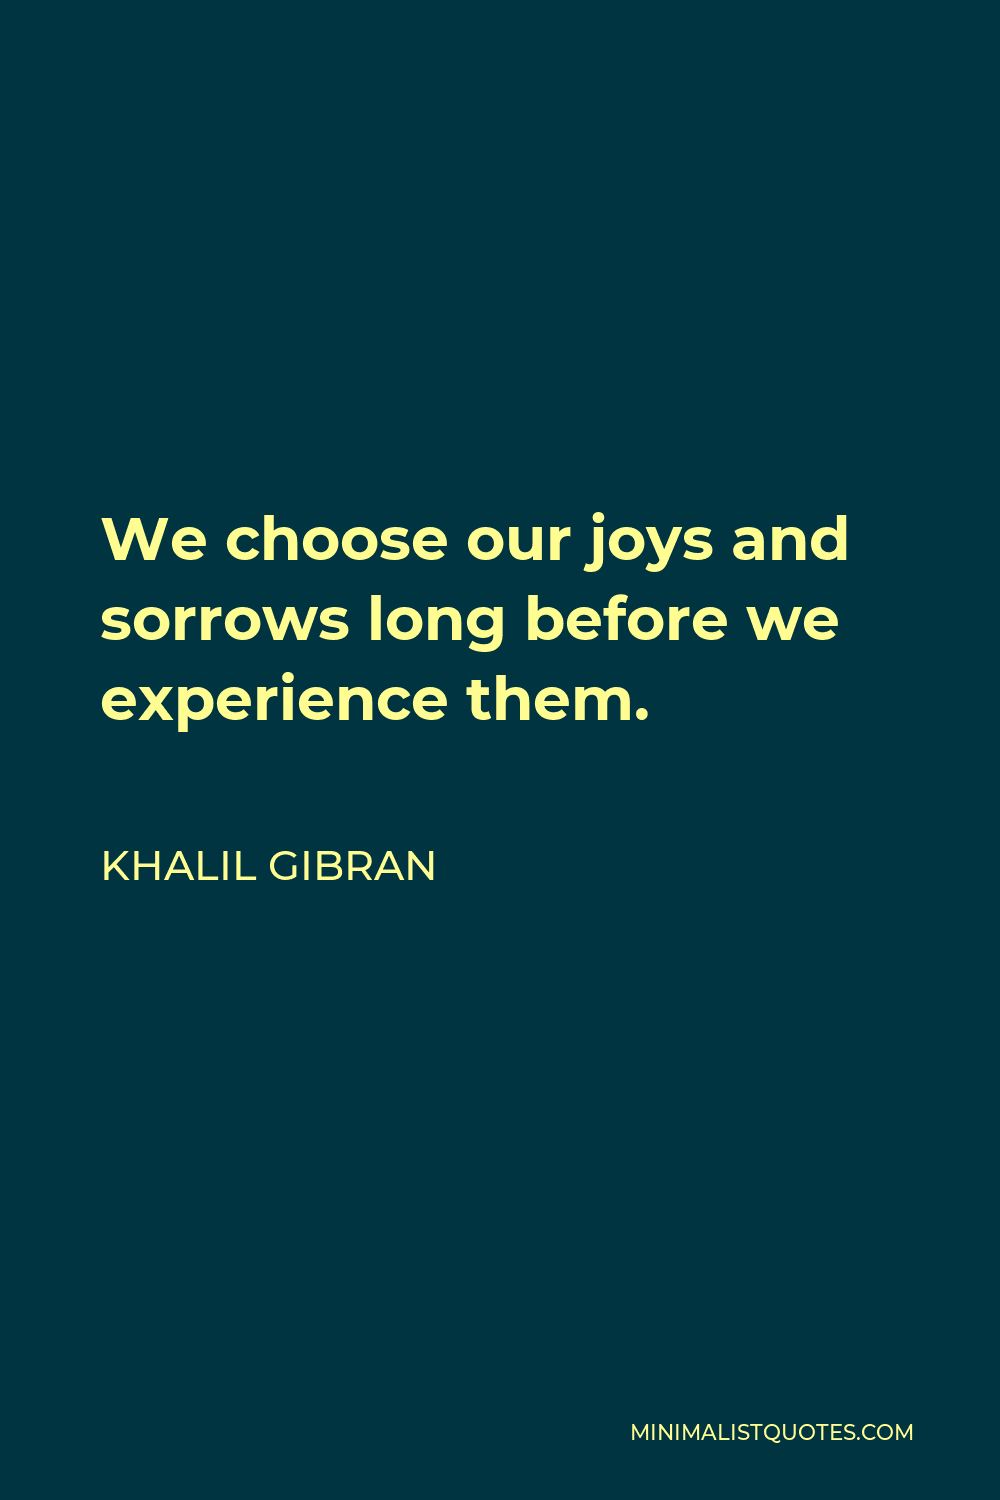 Khalil Gibran Quote - We choose our joys and sorrows long before we experience them.